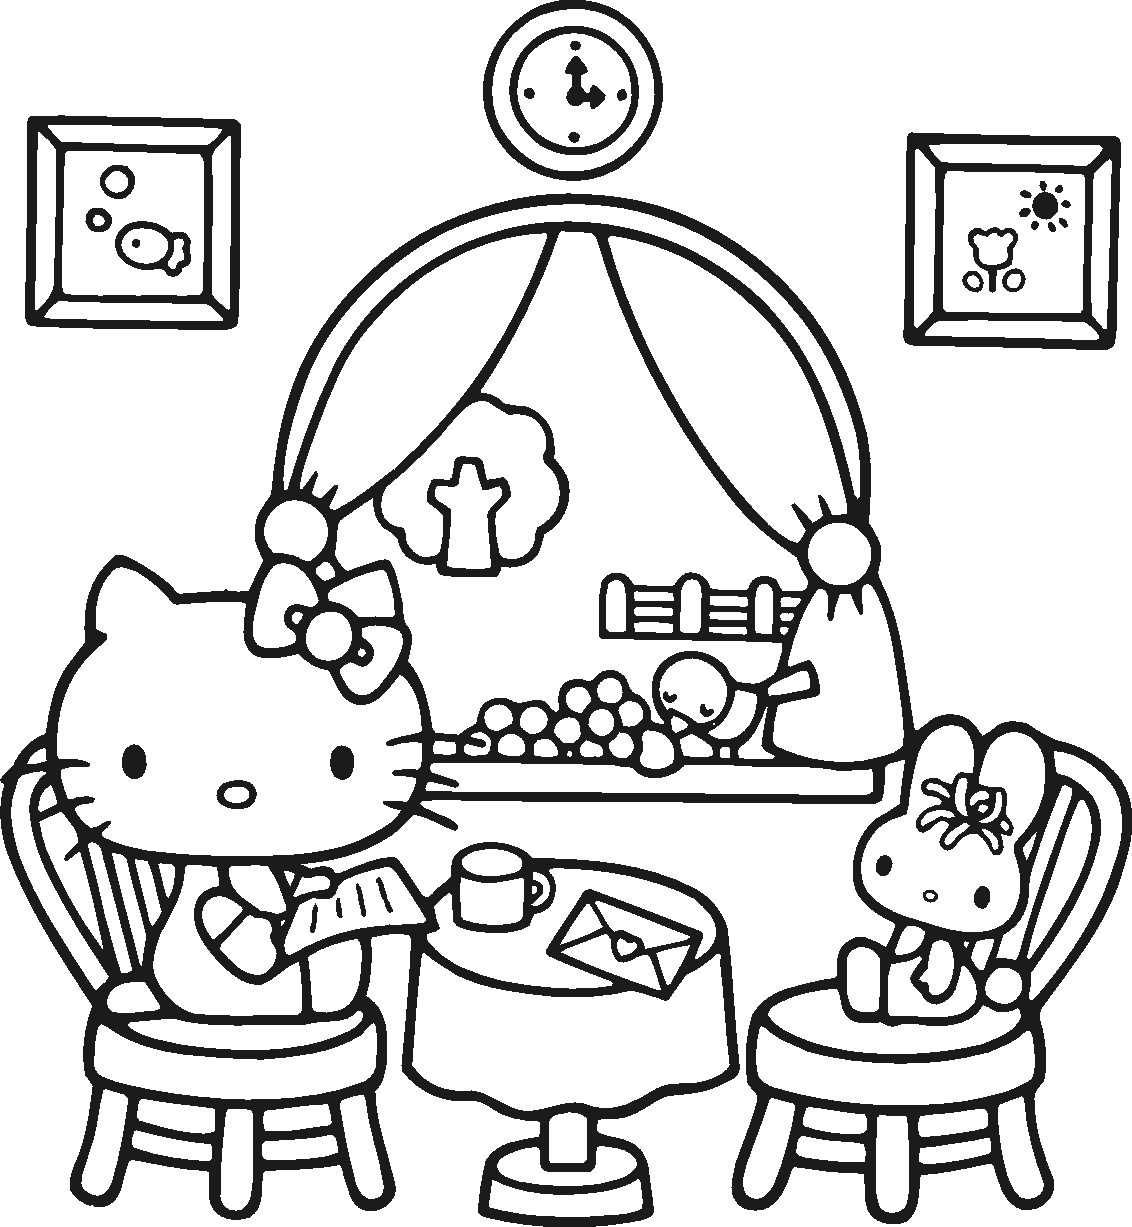 Download Free Printable Hello Kitty Coloring Pages For Kids Coloring Home